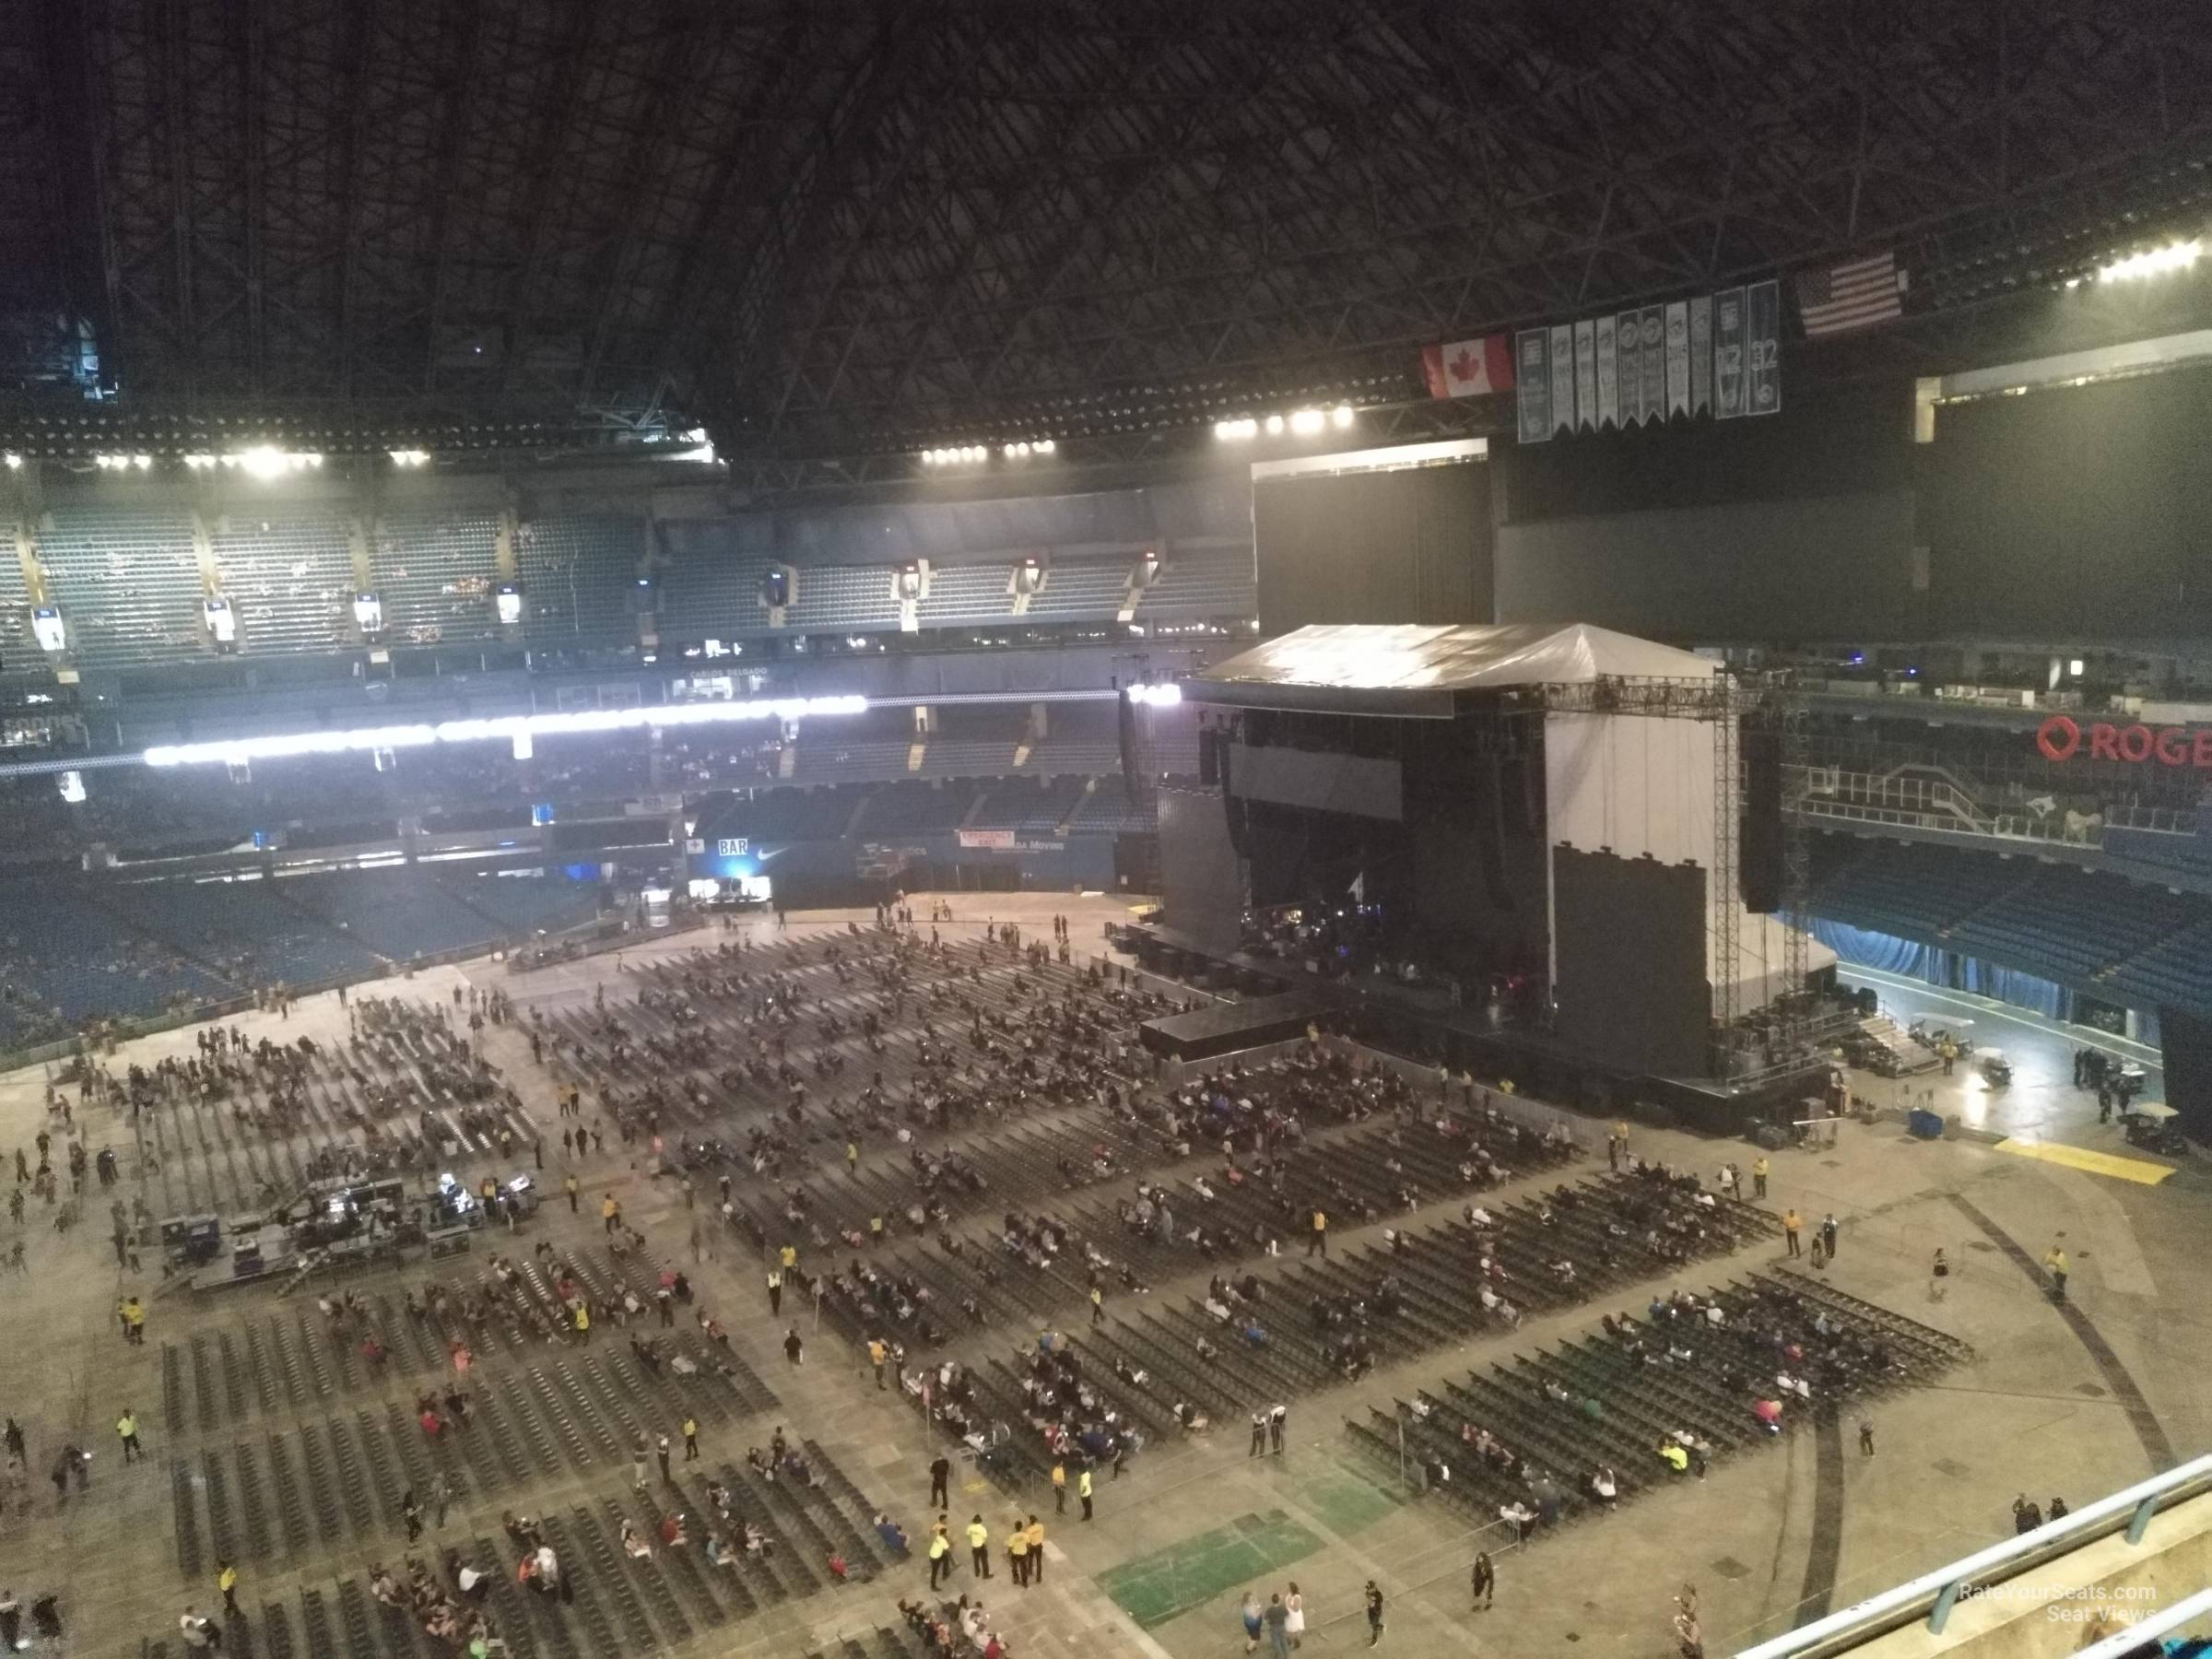 section 513, row 5 seat view  for concert - rogers centre